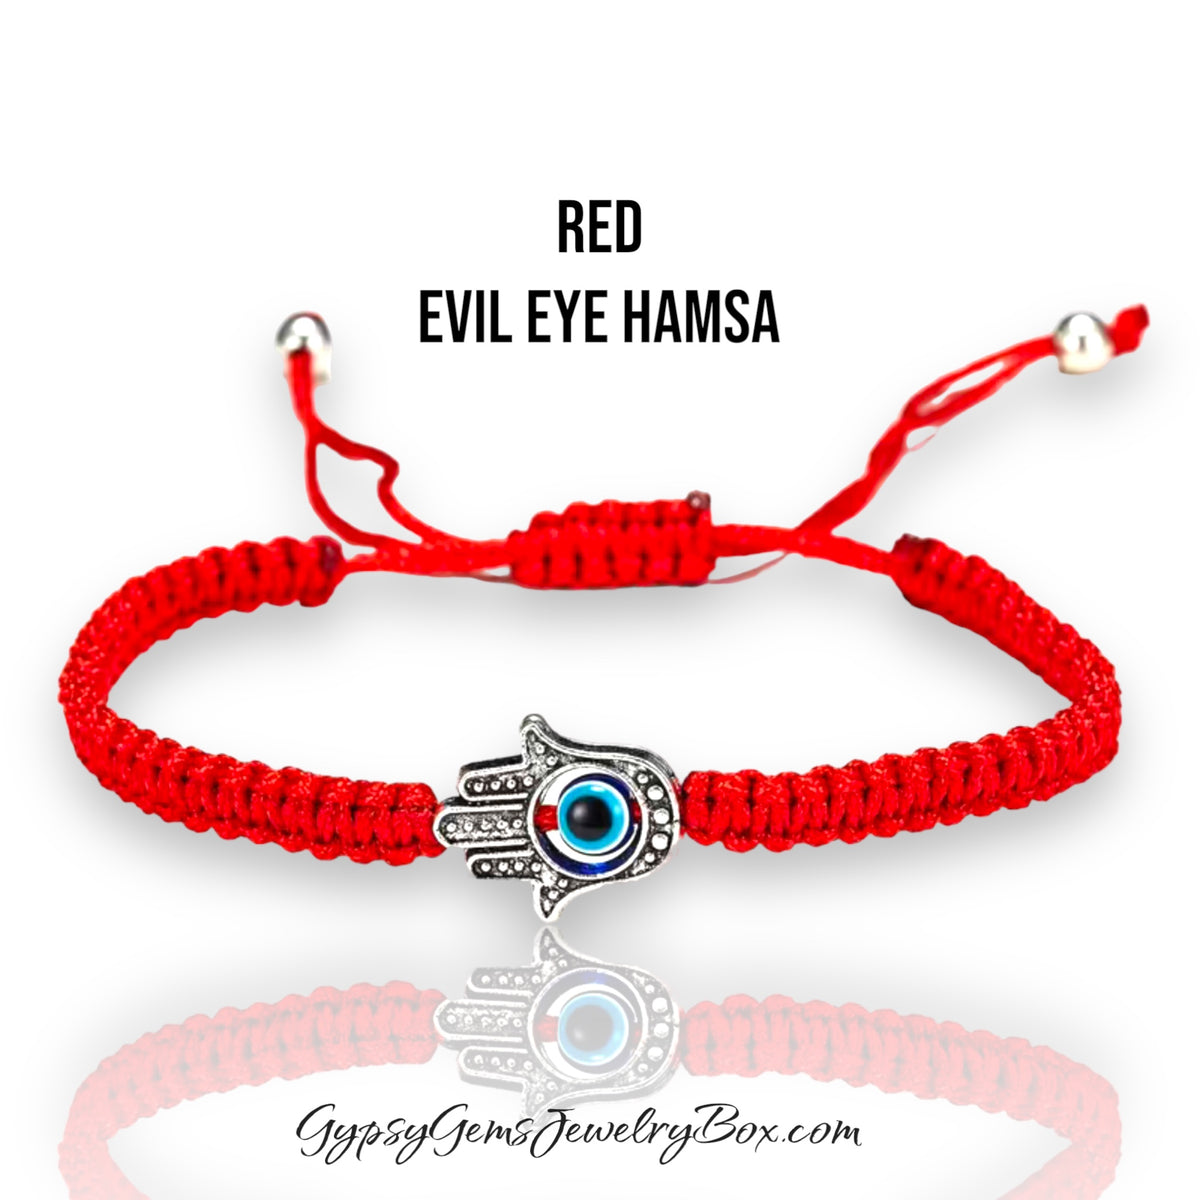 Red and Evil Eyes Bracelet Red Coral Crystal Stones with Eyes Beads